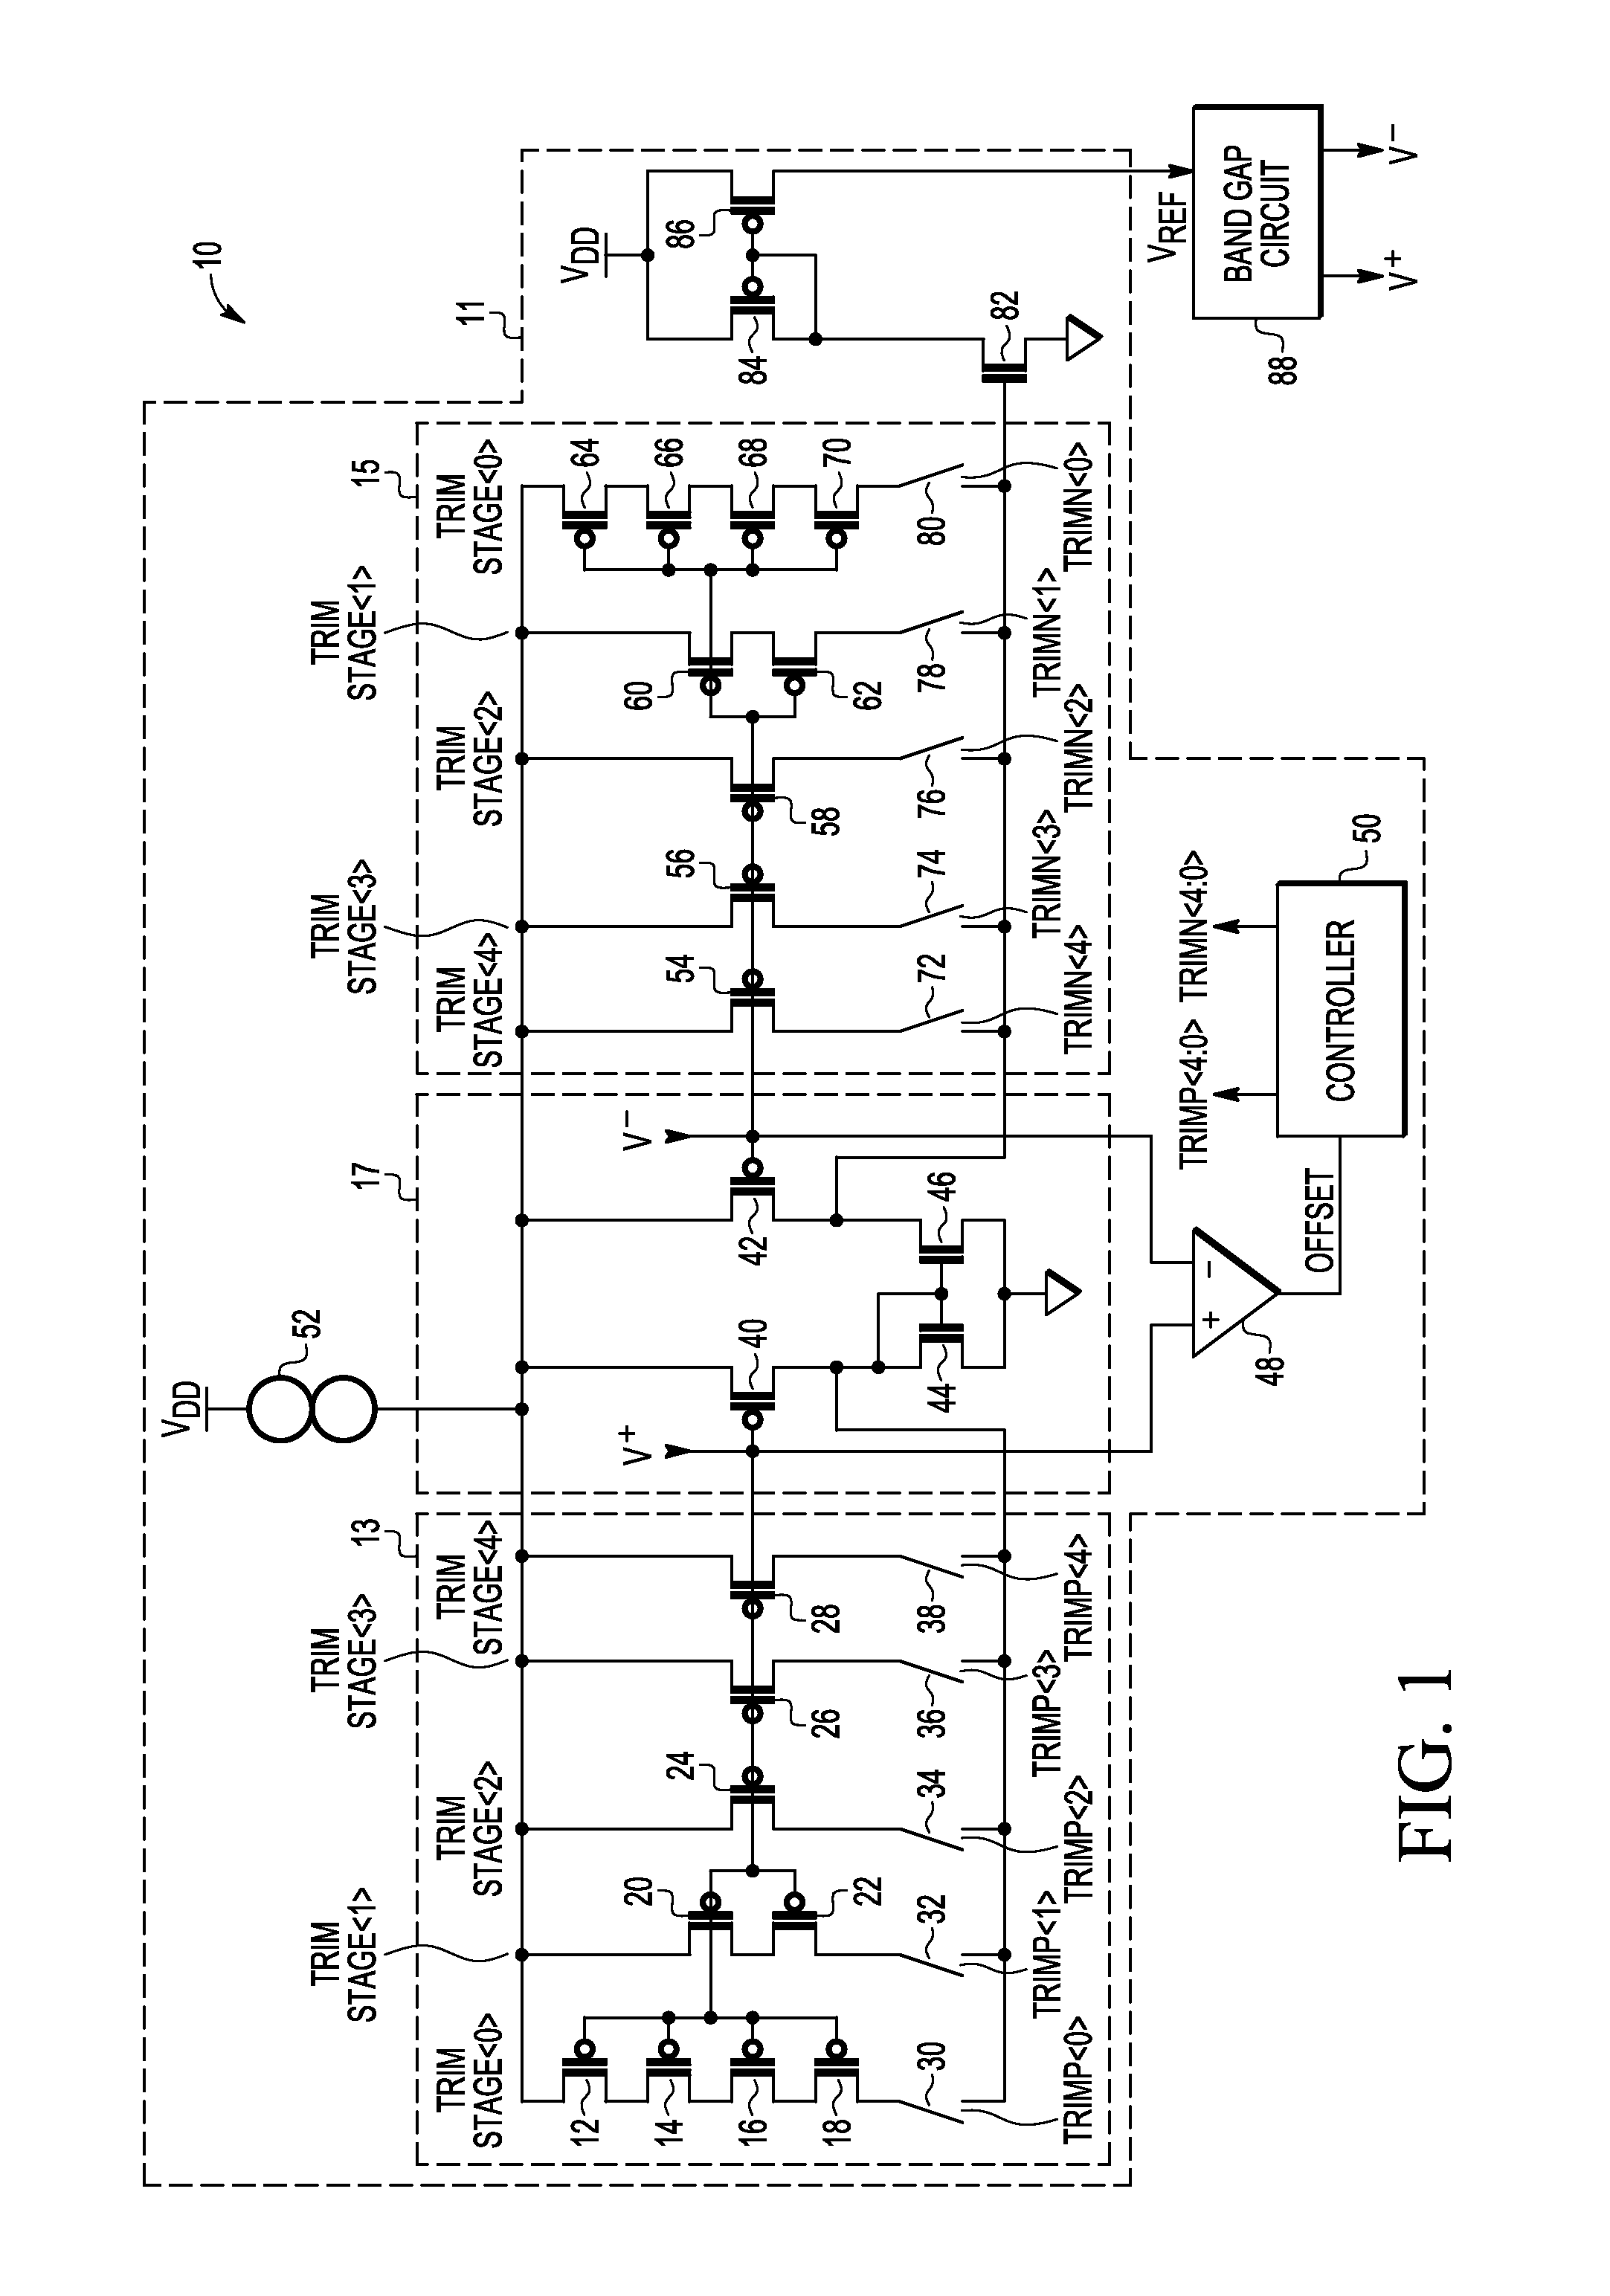 Methods and structures for dynamically calibrating reference voltage